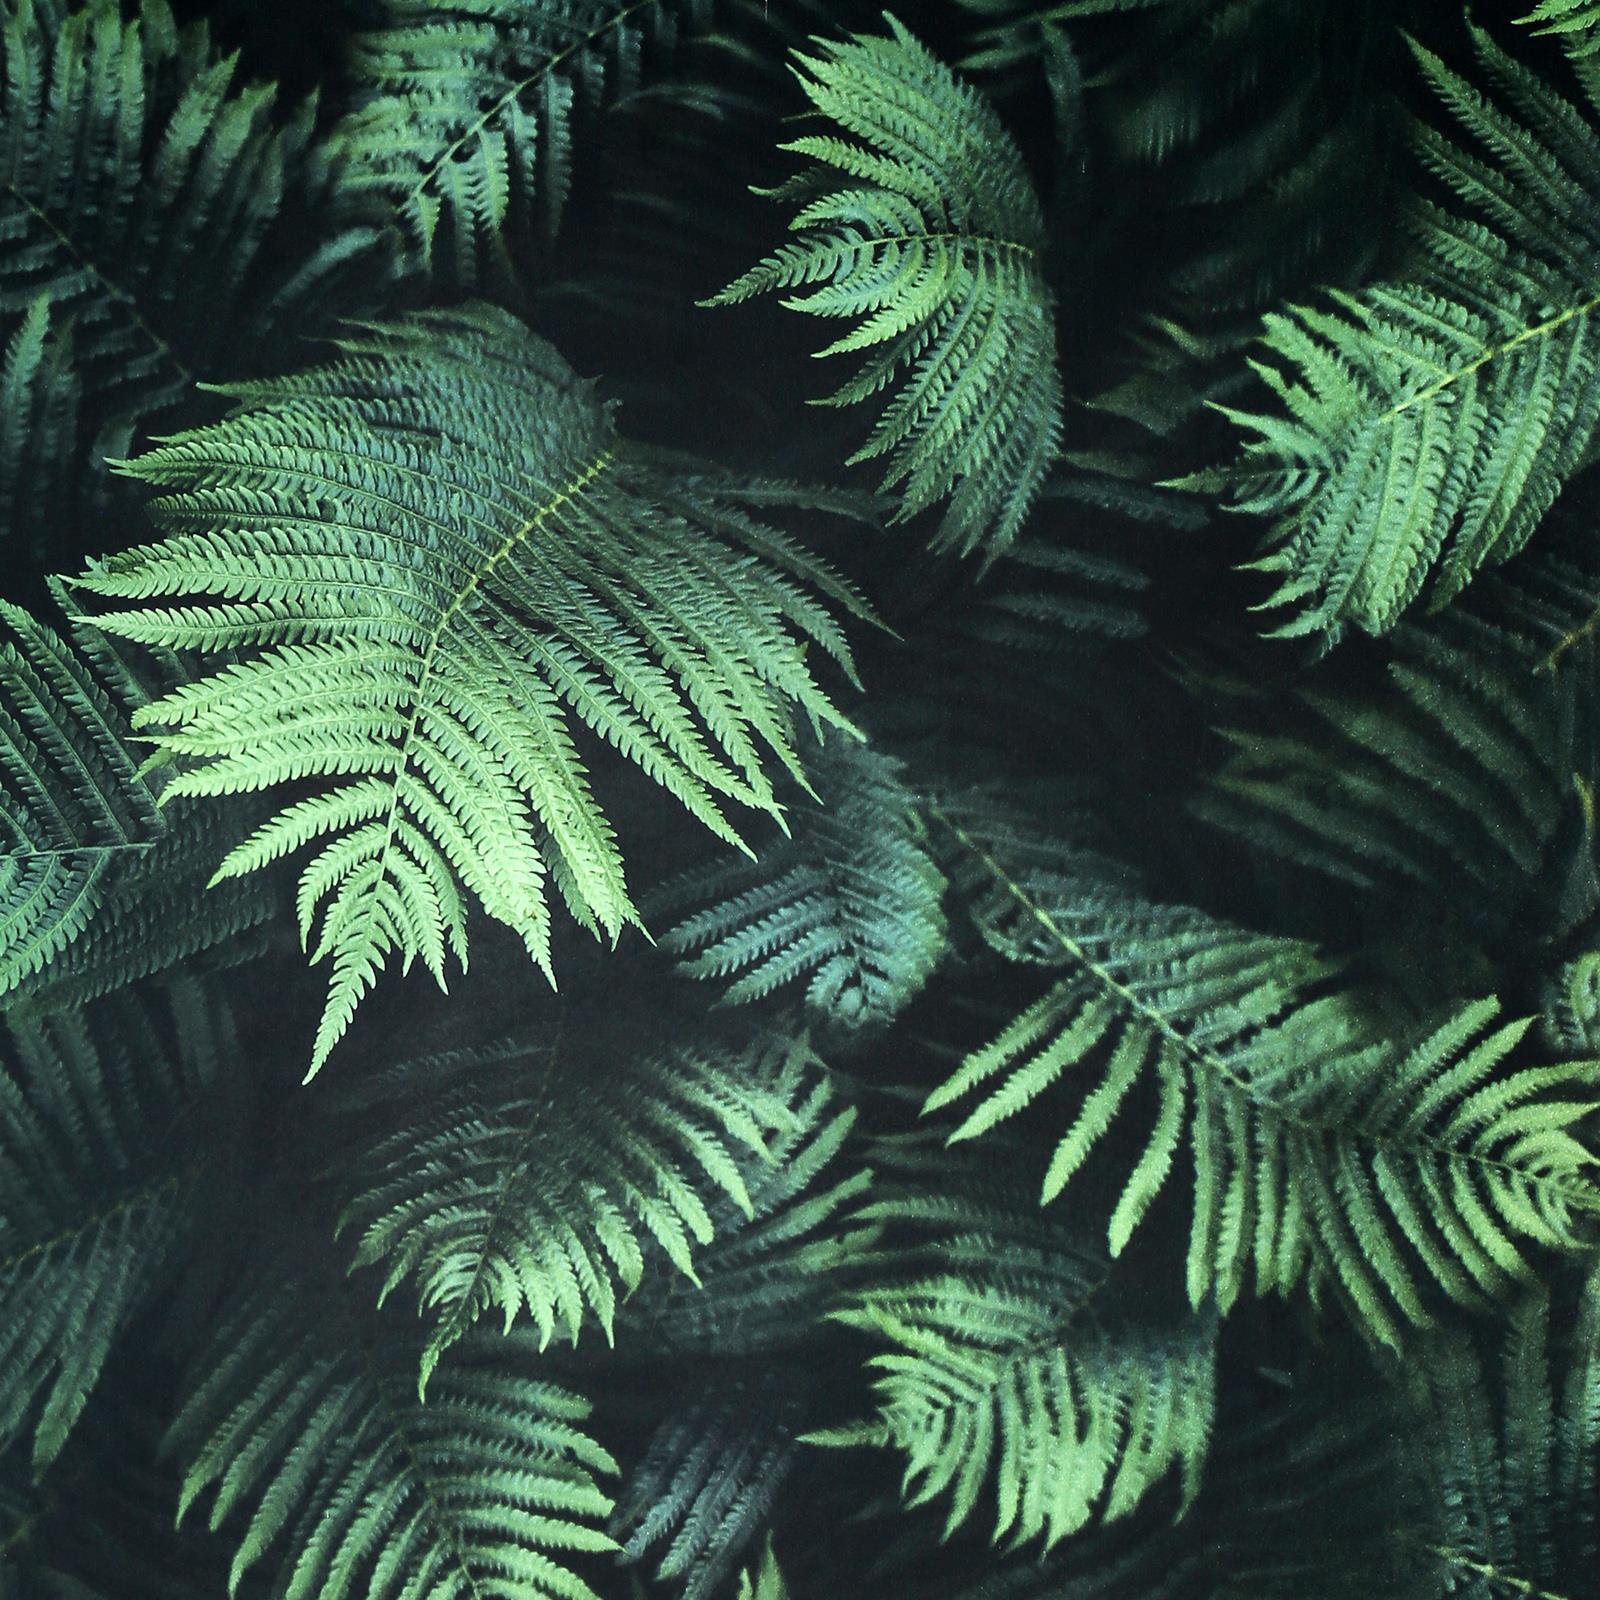 A close up of some green leaves - Tropical, jungle